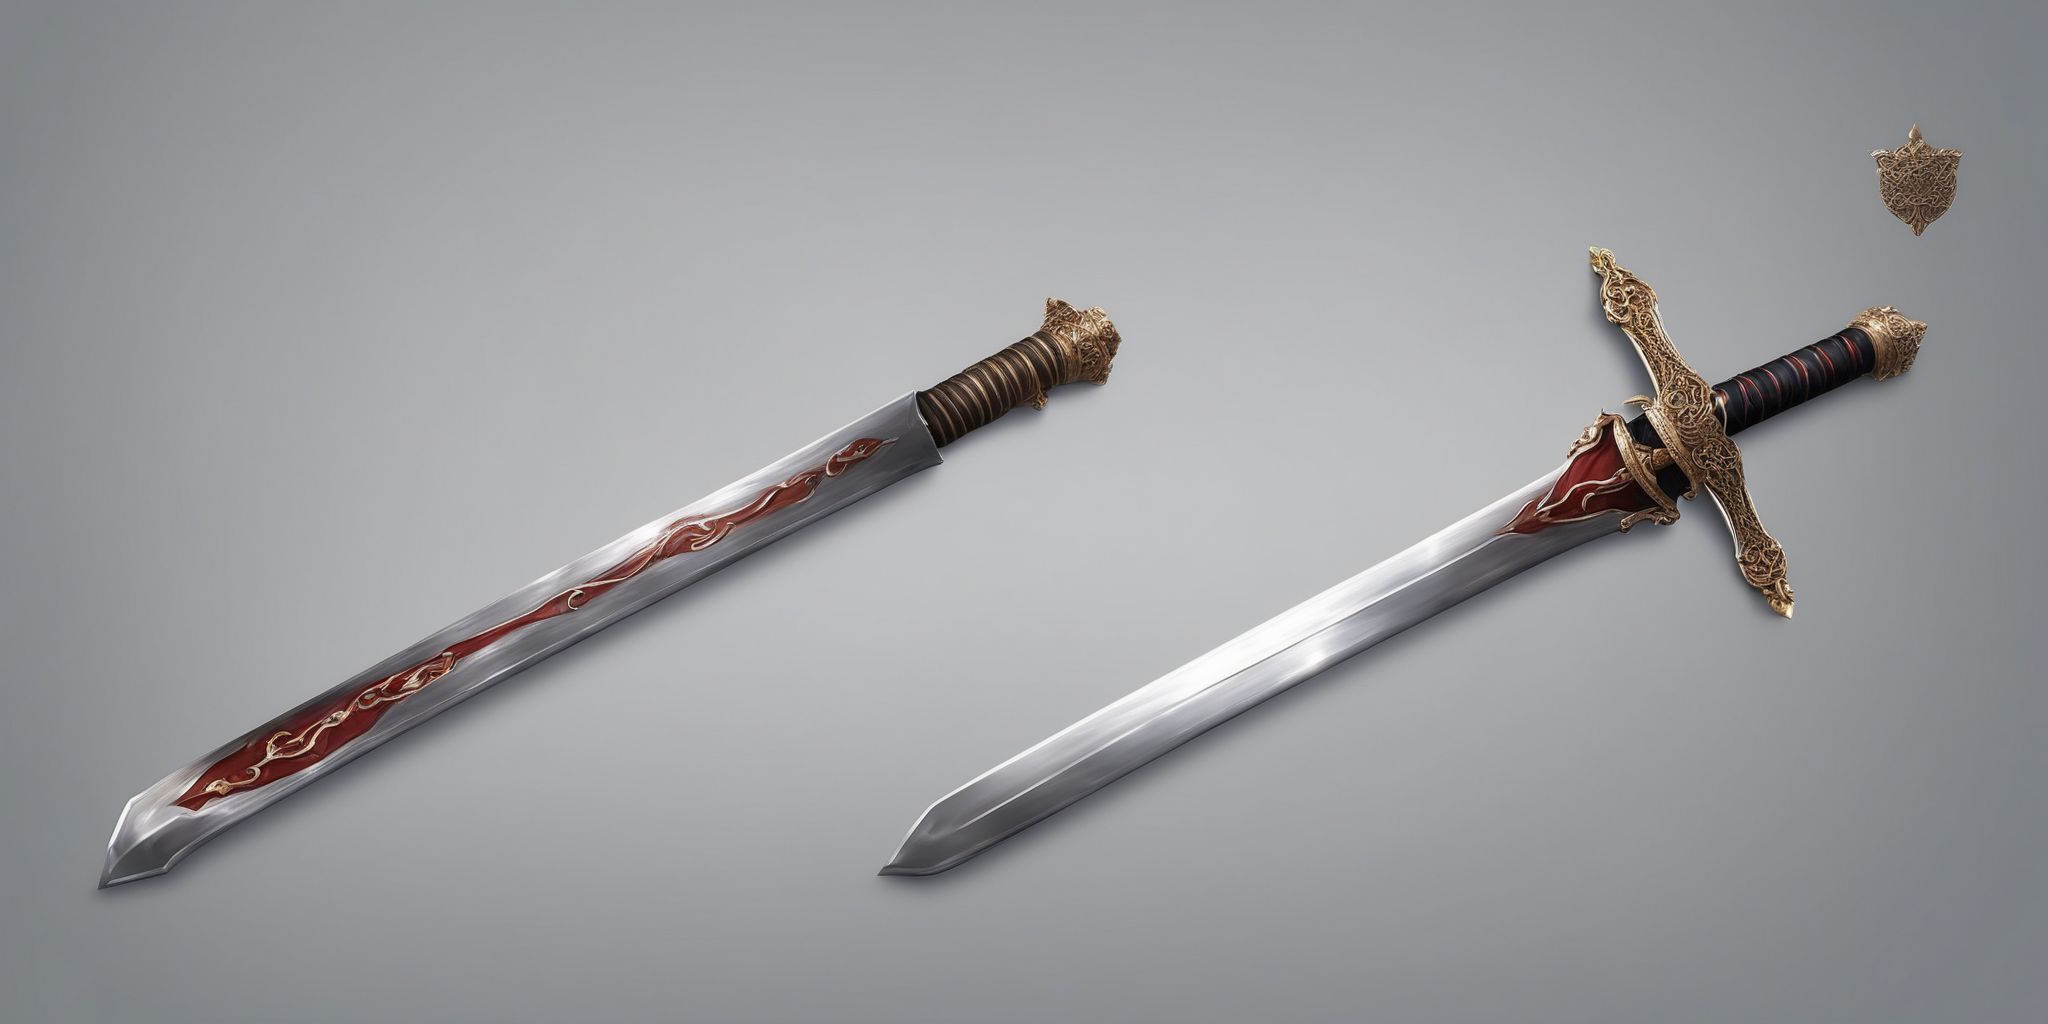 Sword  in realistic, photographic style